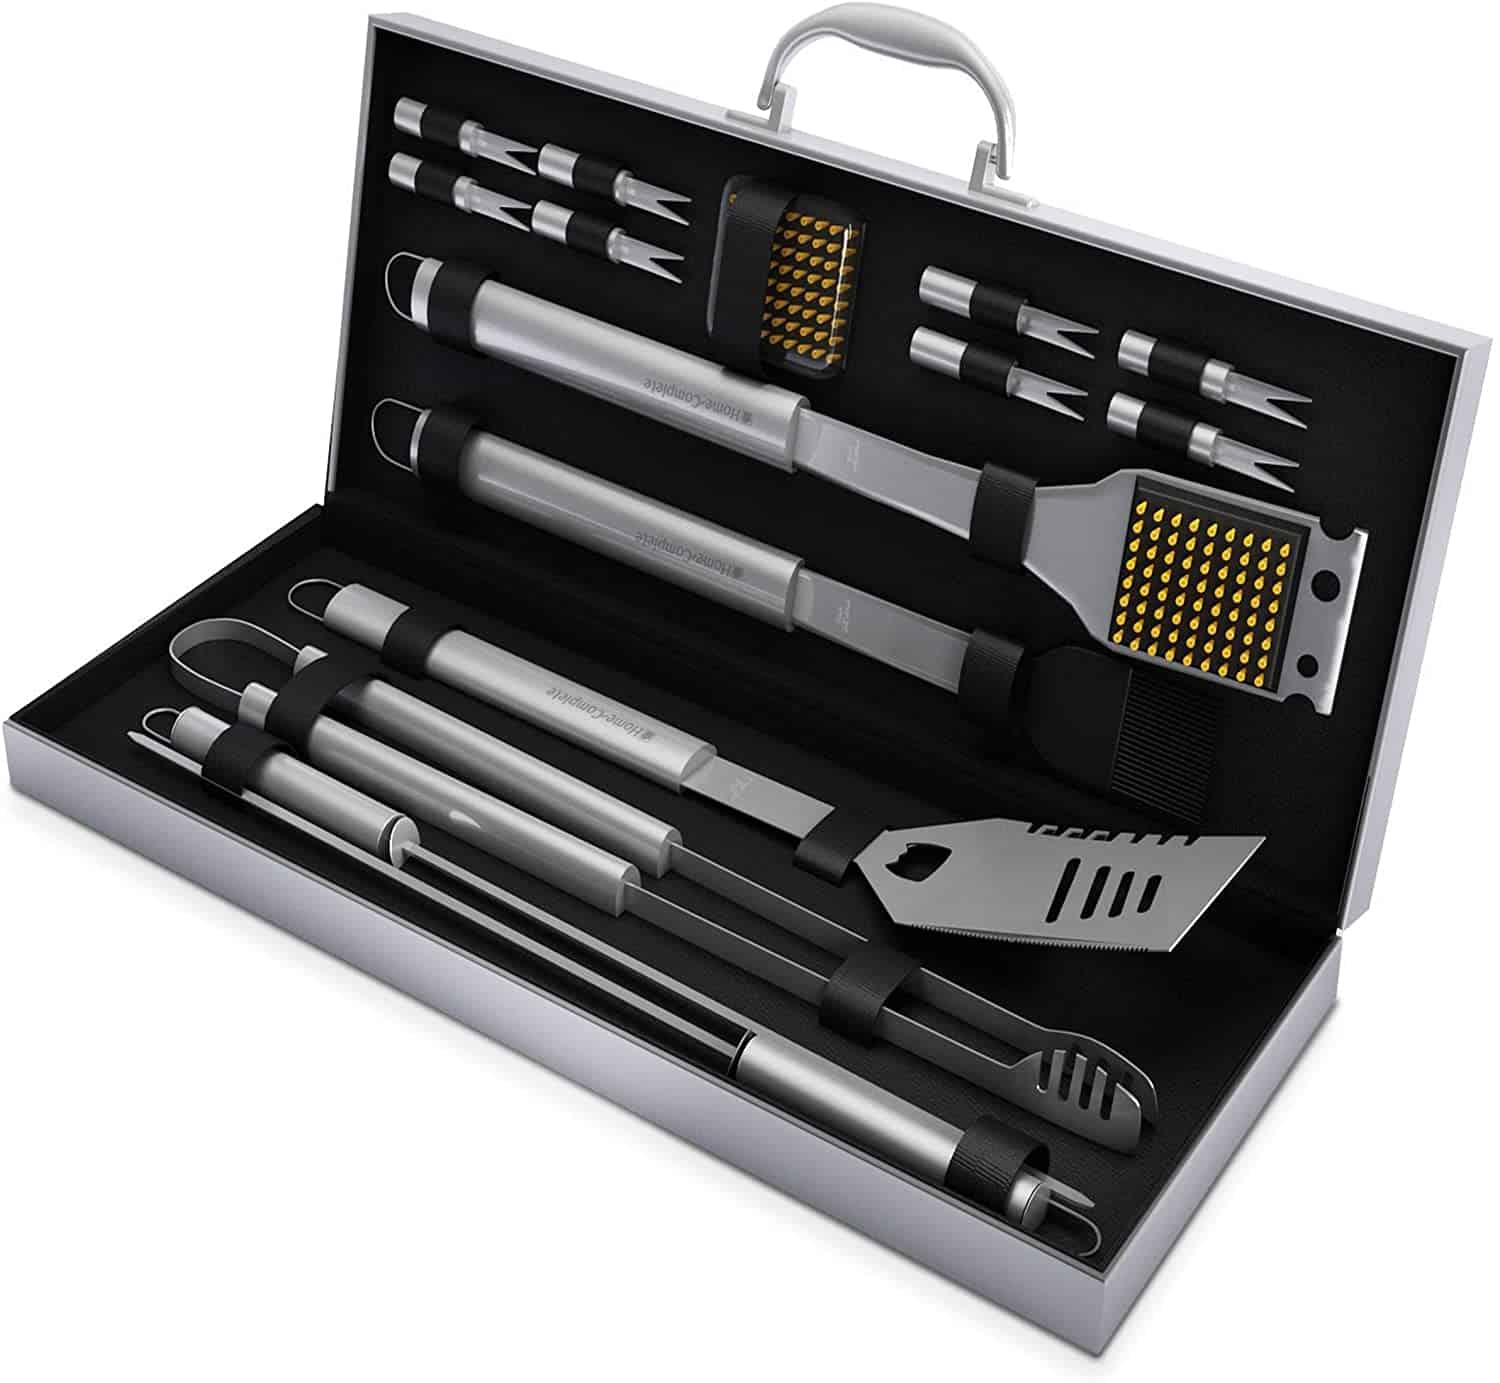 Best grill set for gifting- Home-Complete BBQ Grill Set